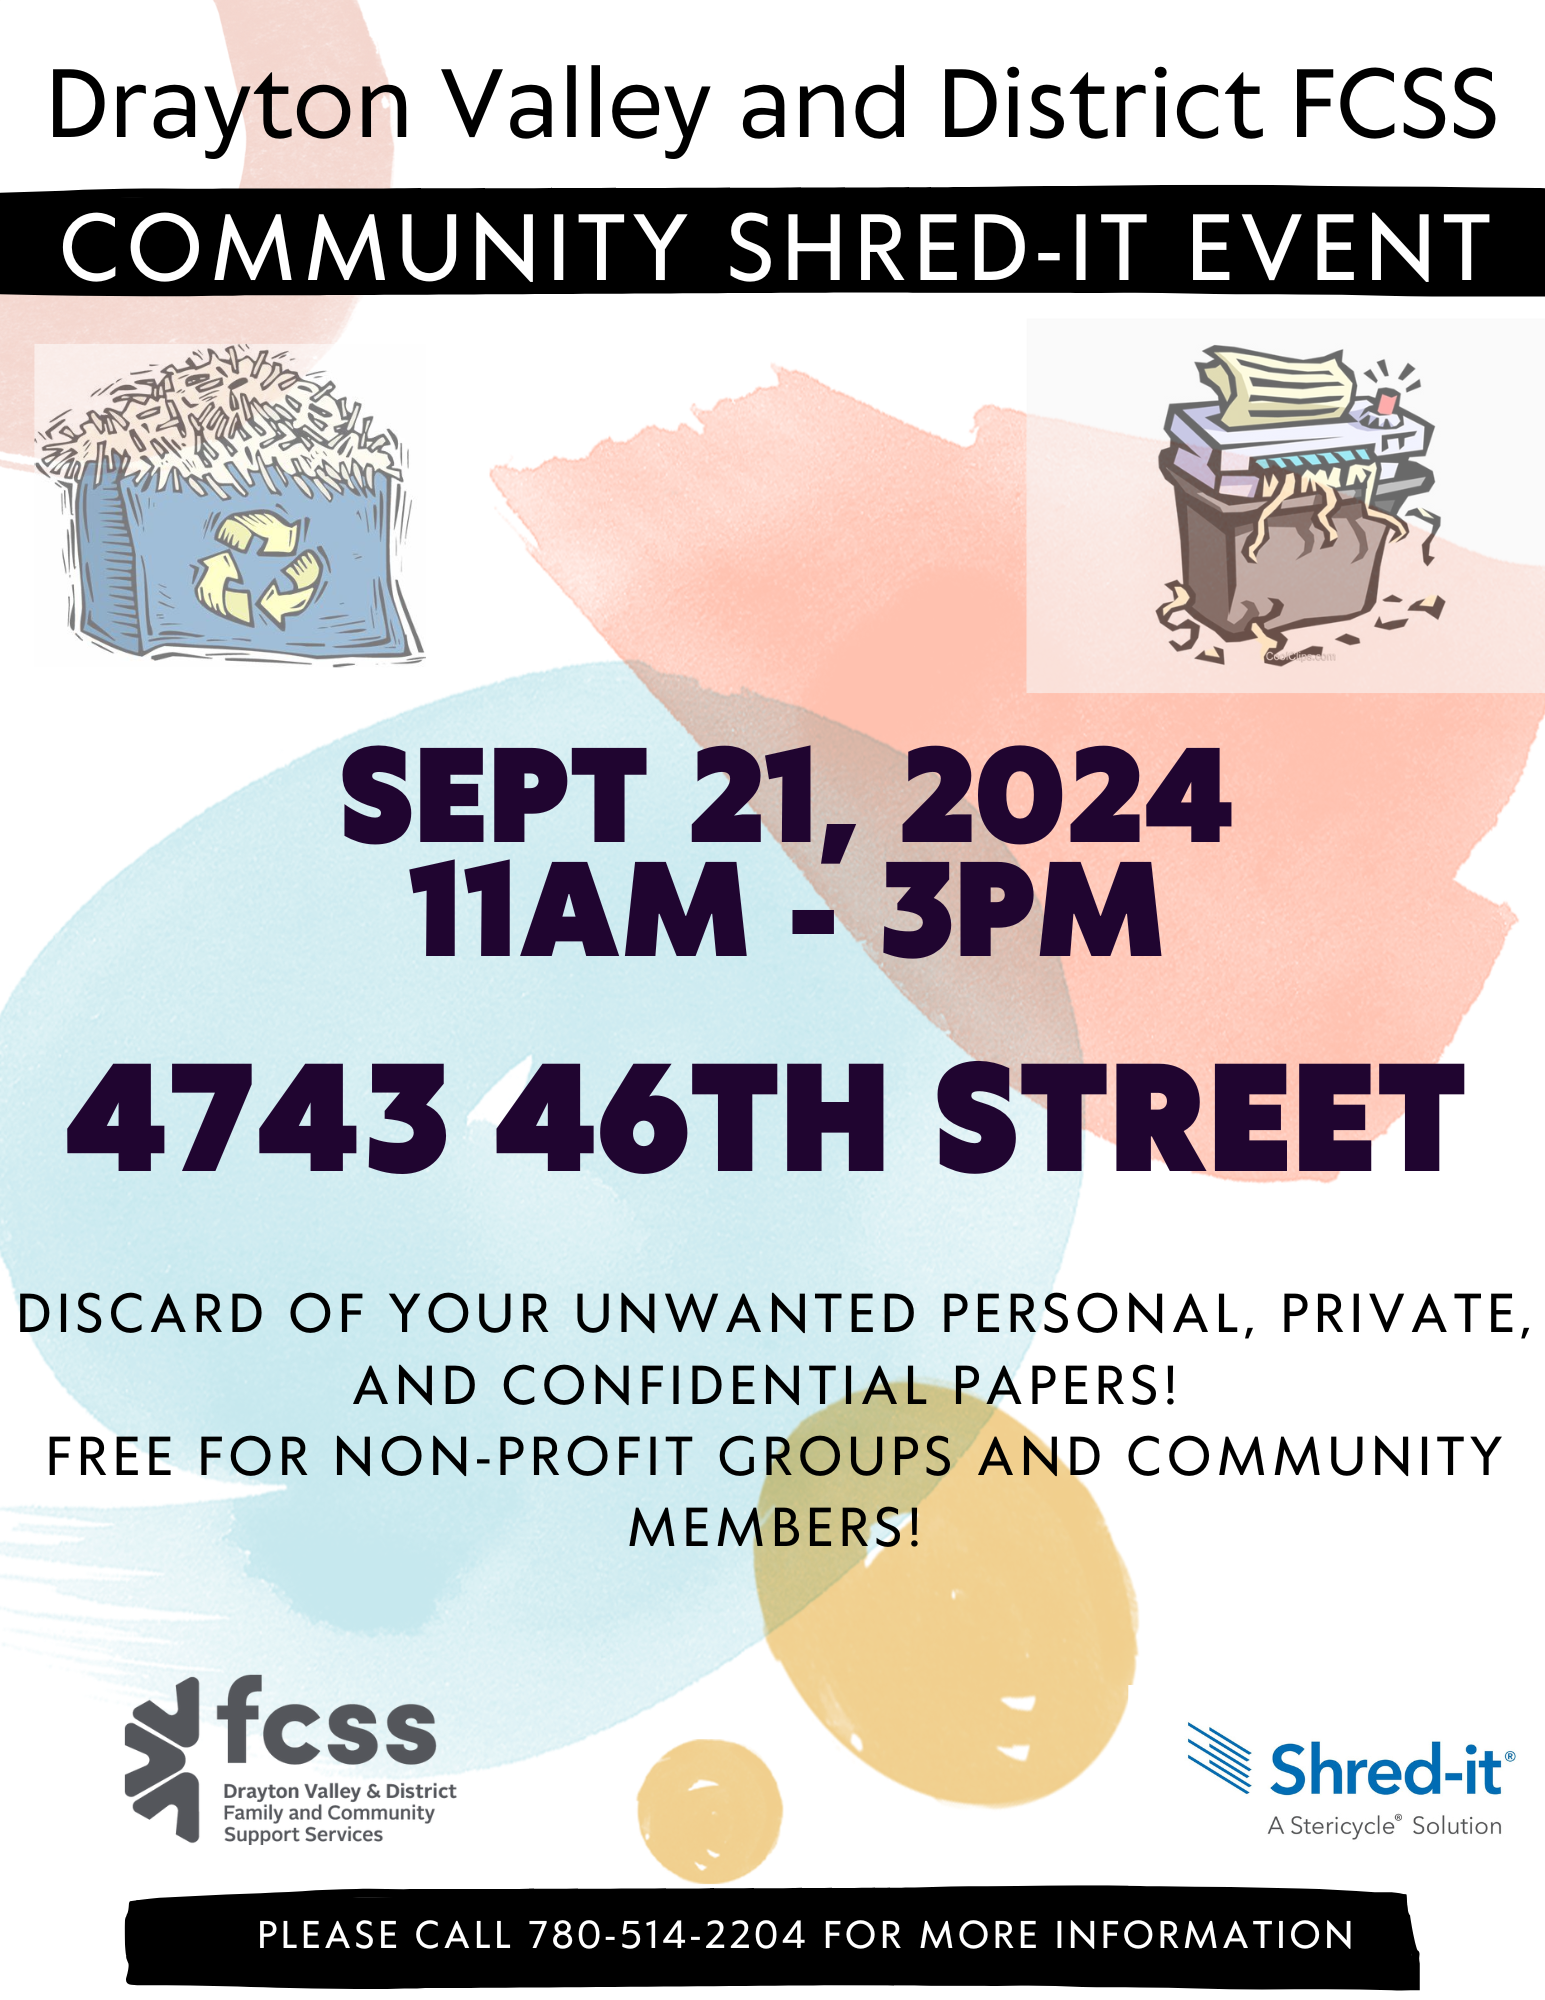 Drayton Valley & District FCSS Shred-It